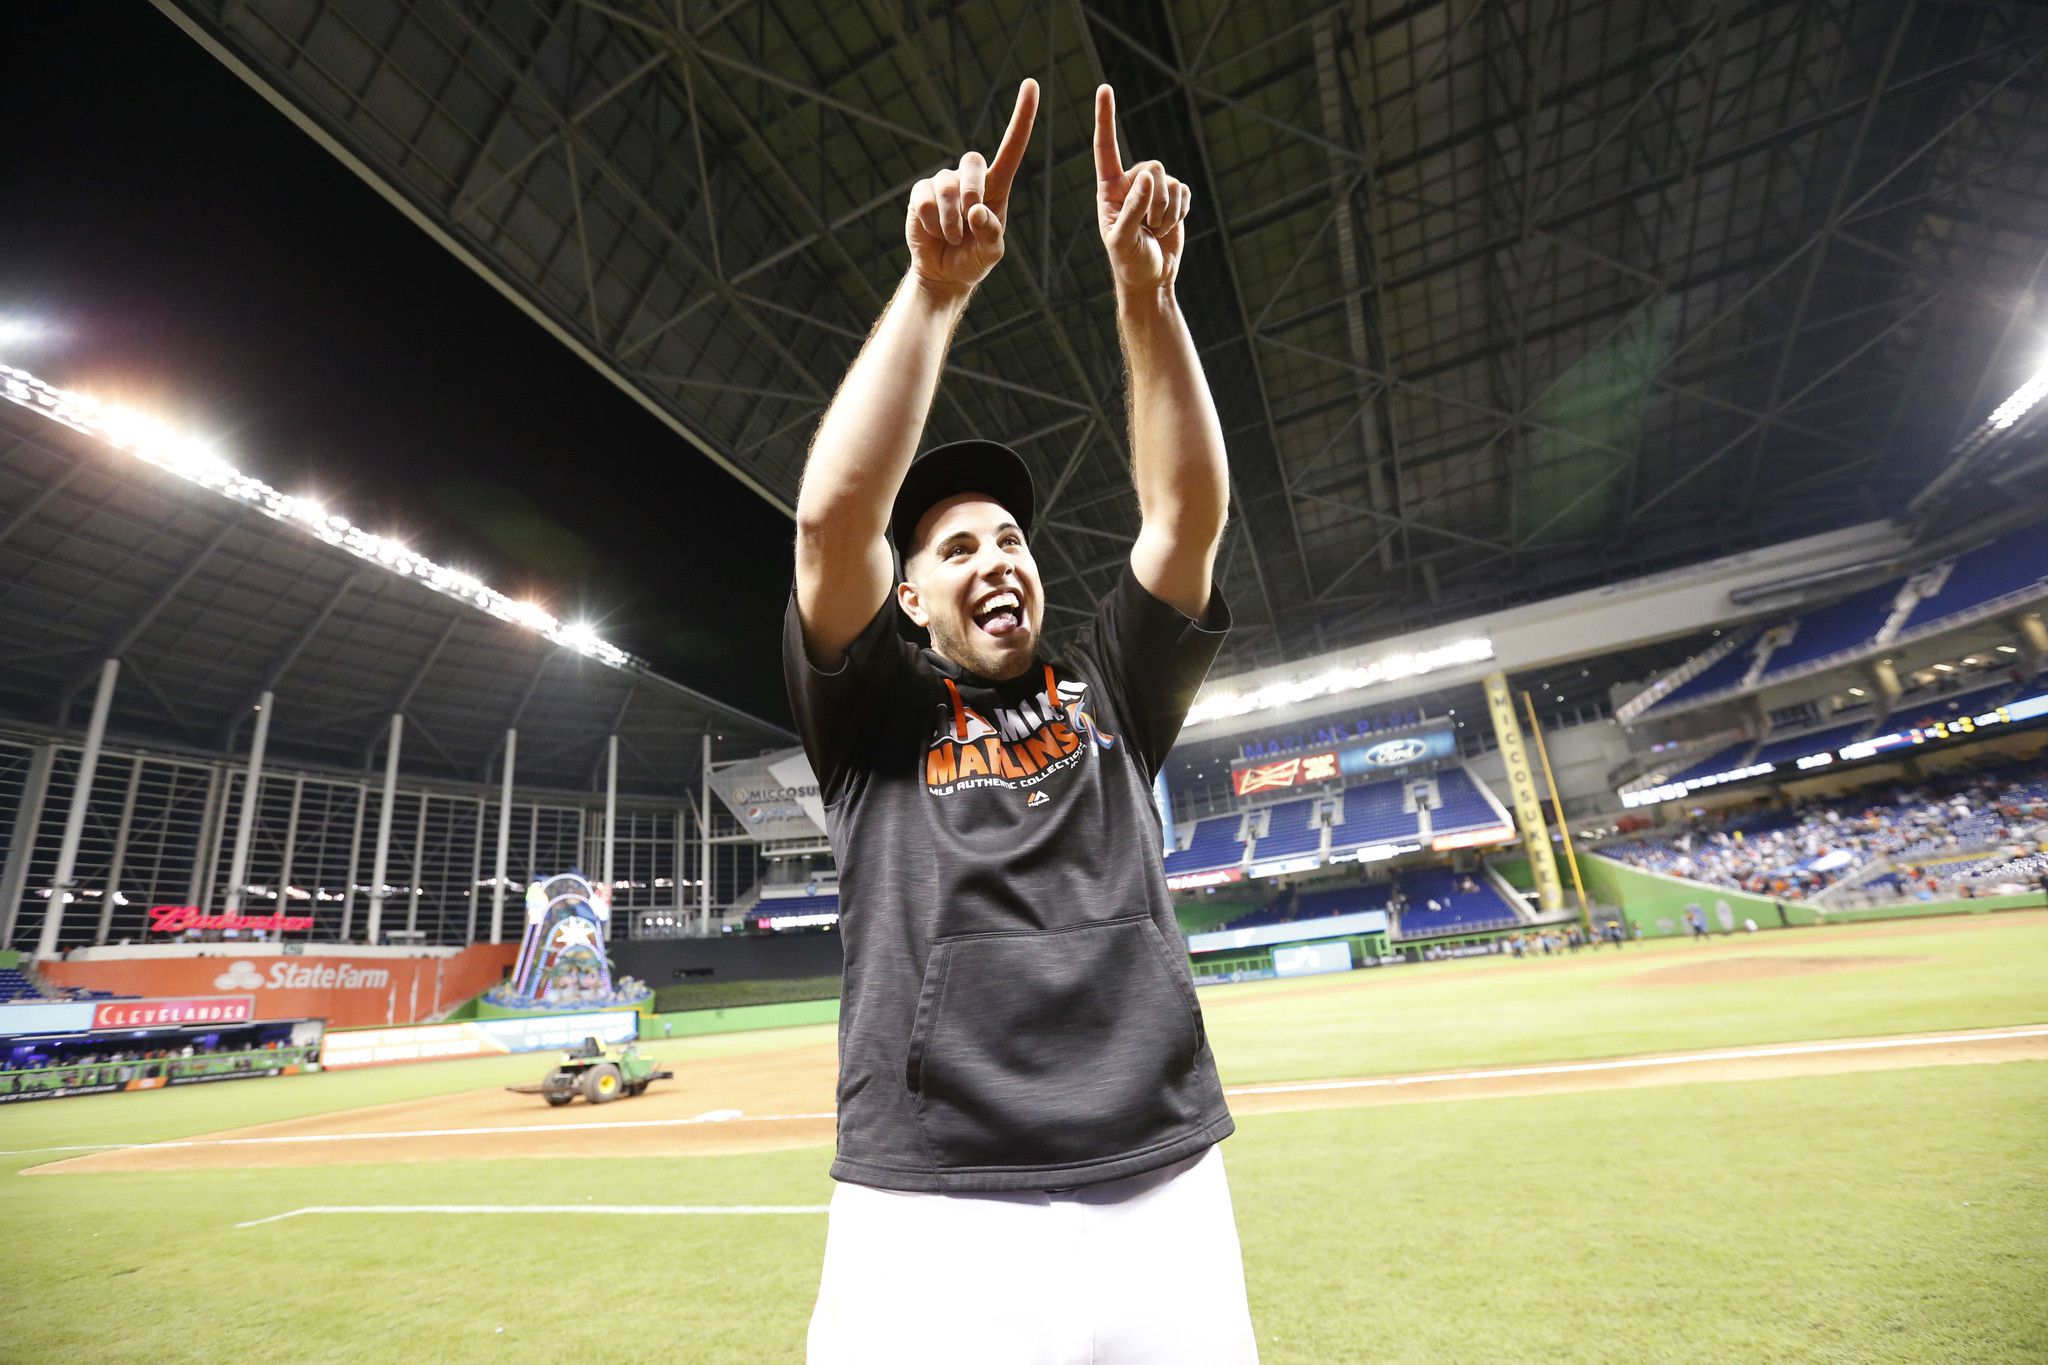 All-Star players remember late Marlins ace Jose Fernandez – The